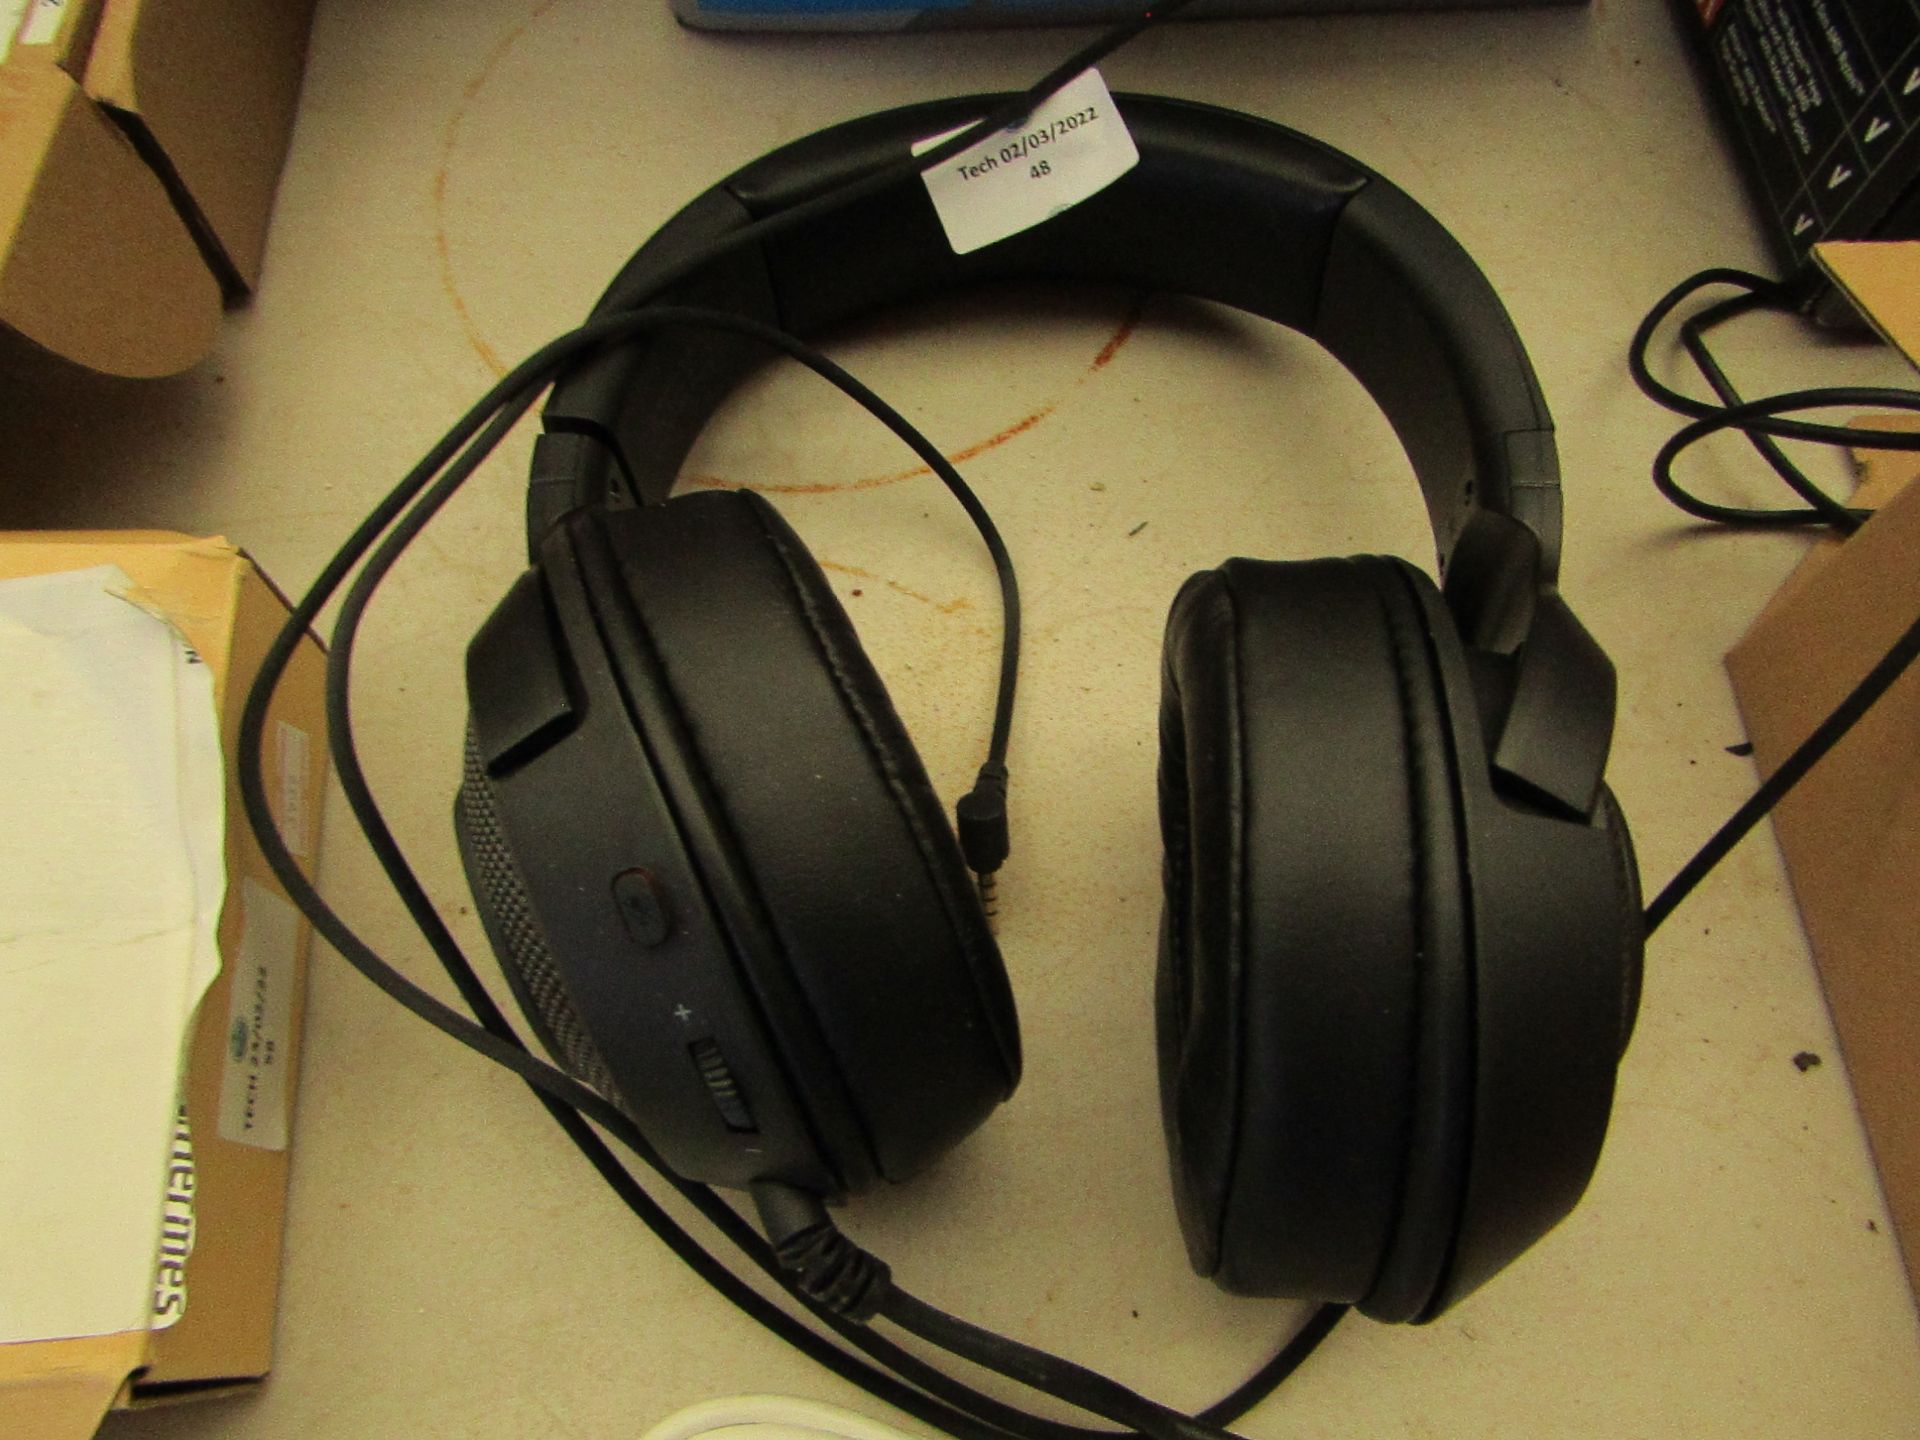 1x Gaming Headset, Unsure What Make/ Model, Unchecked & Packaged, RRP £-